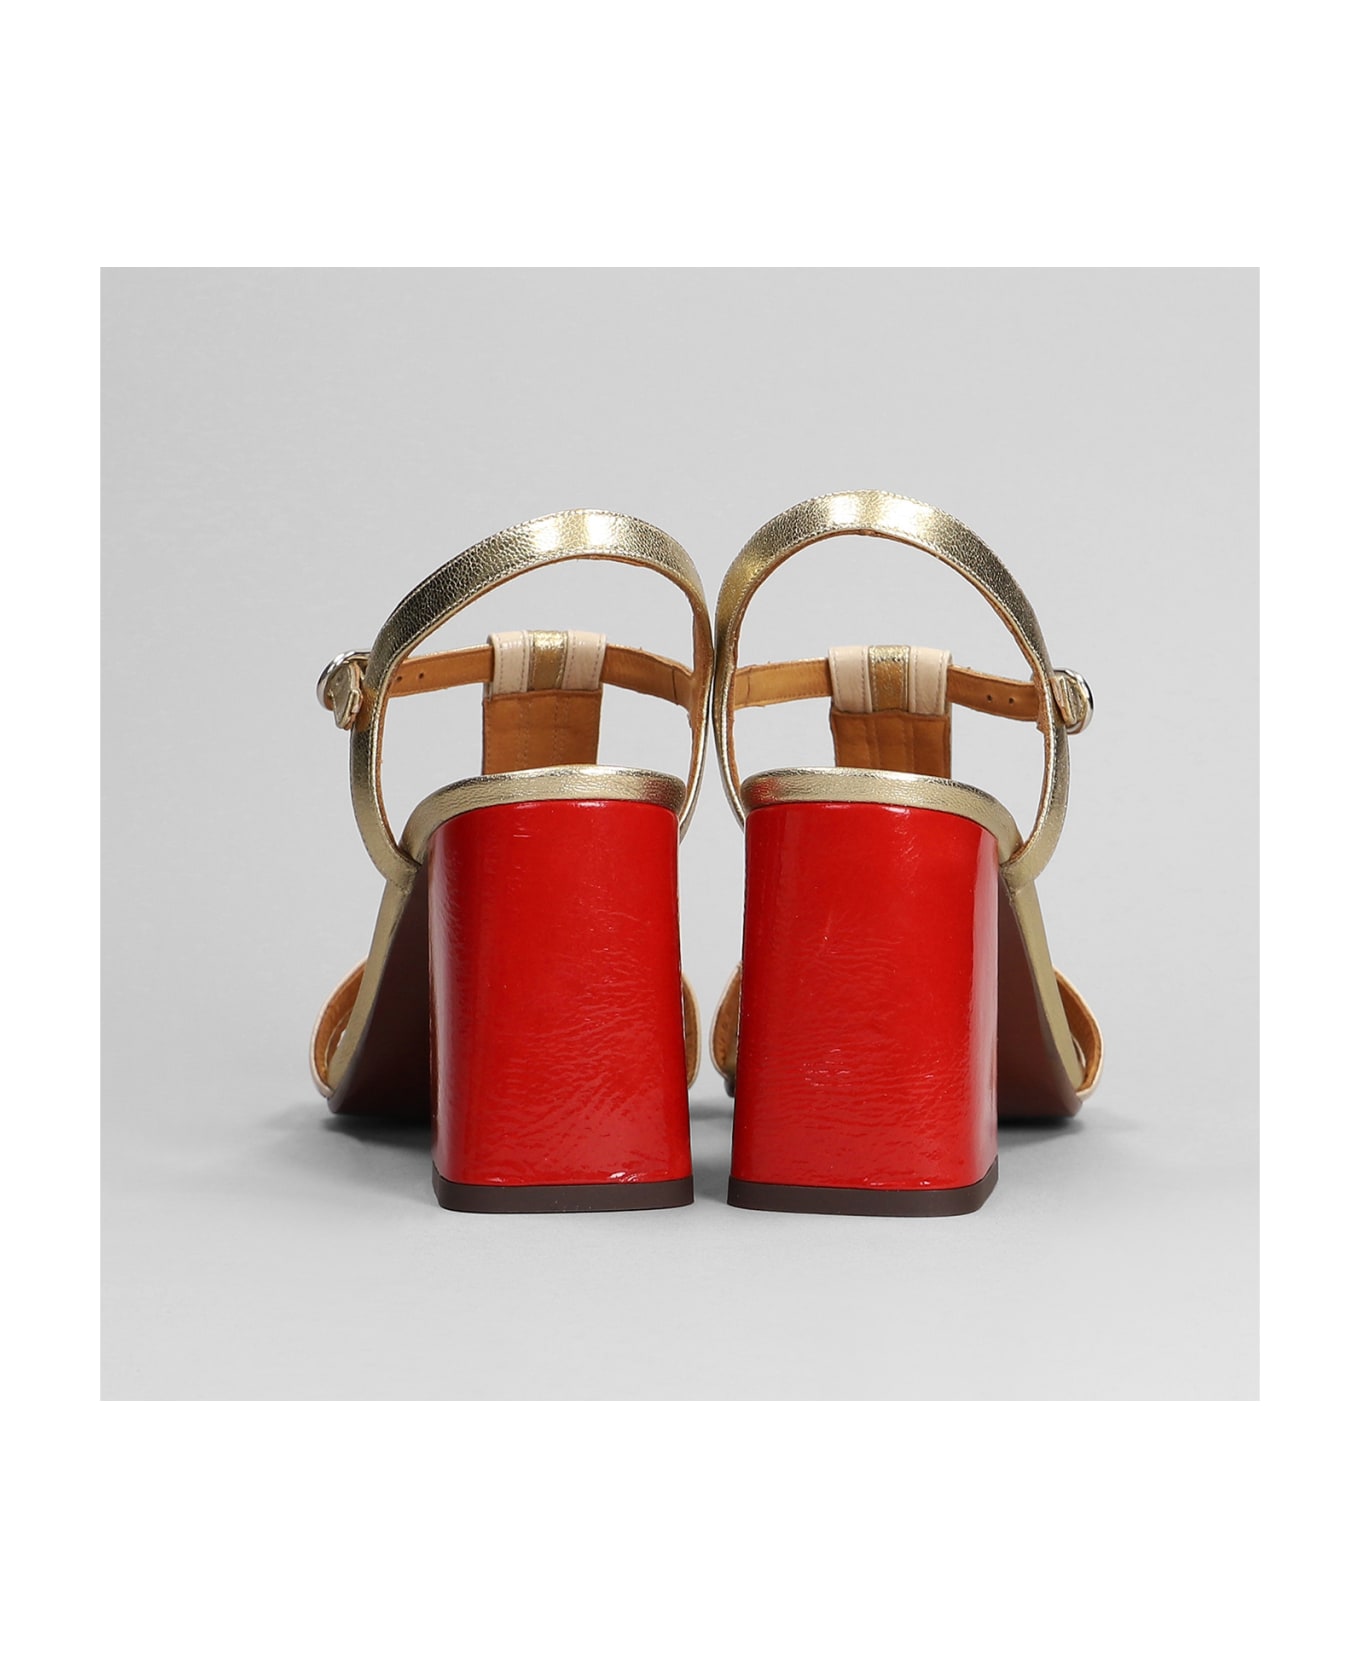 Chie Mihara Piyata Sandals In Gold Leather - gold